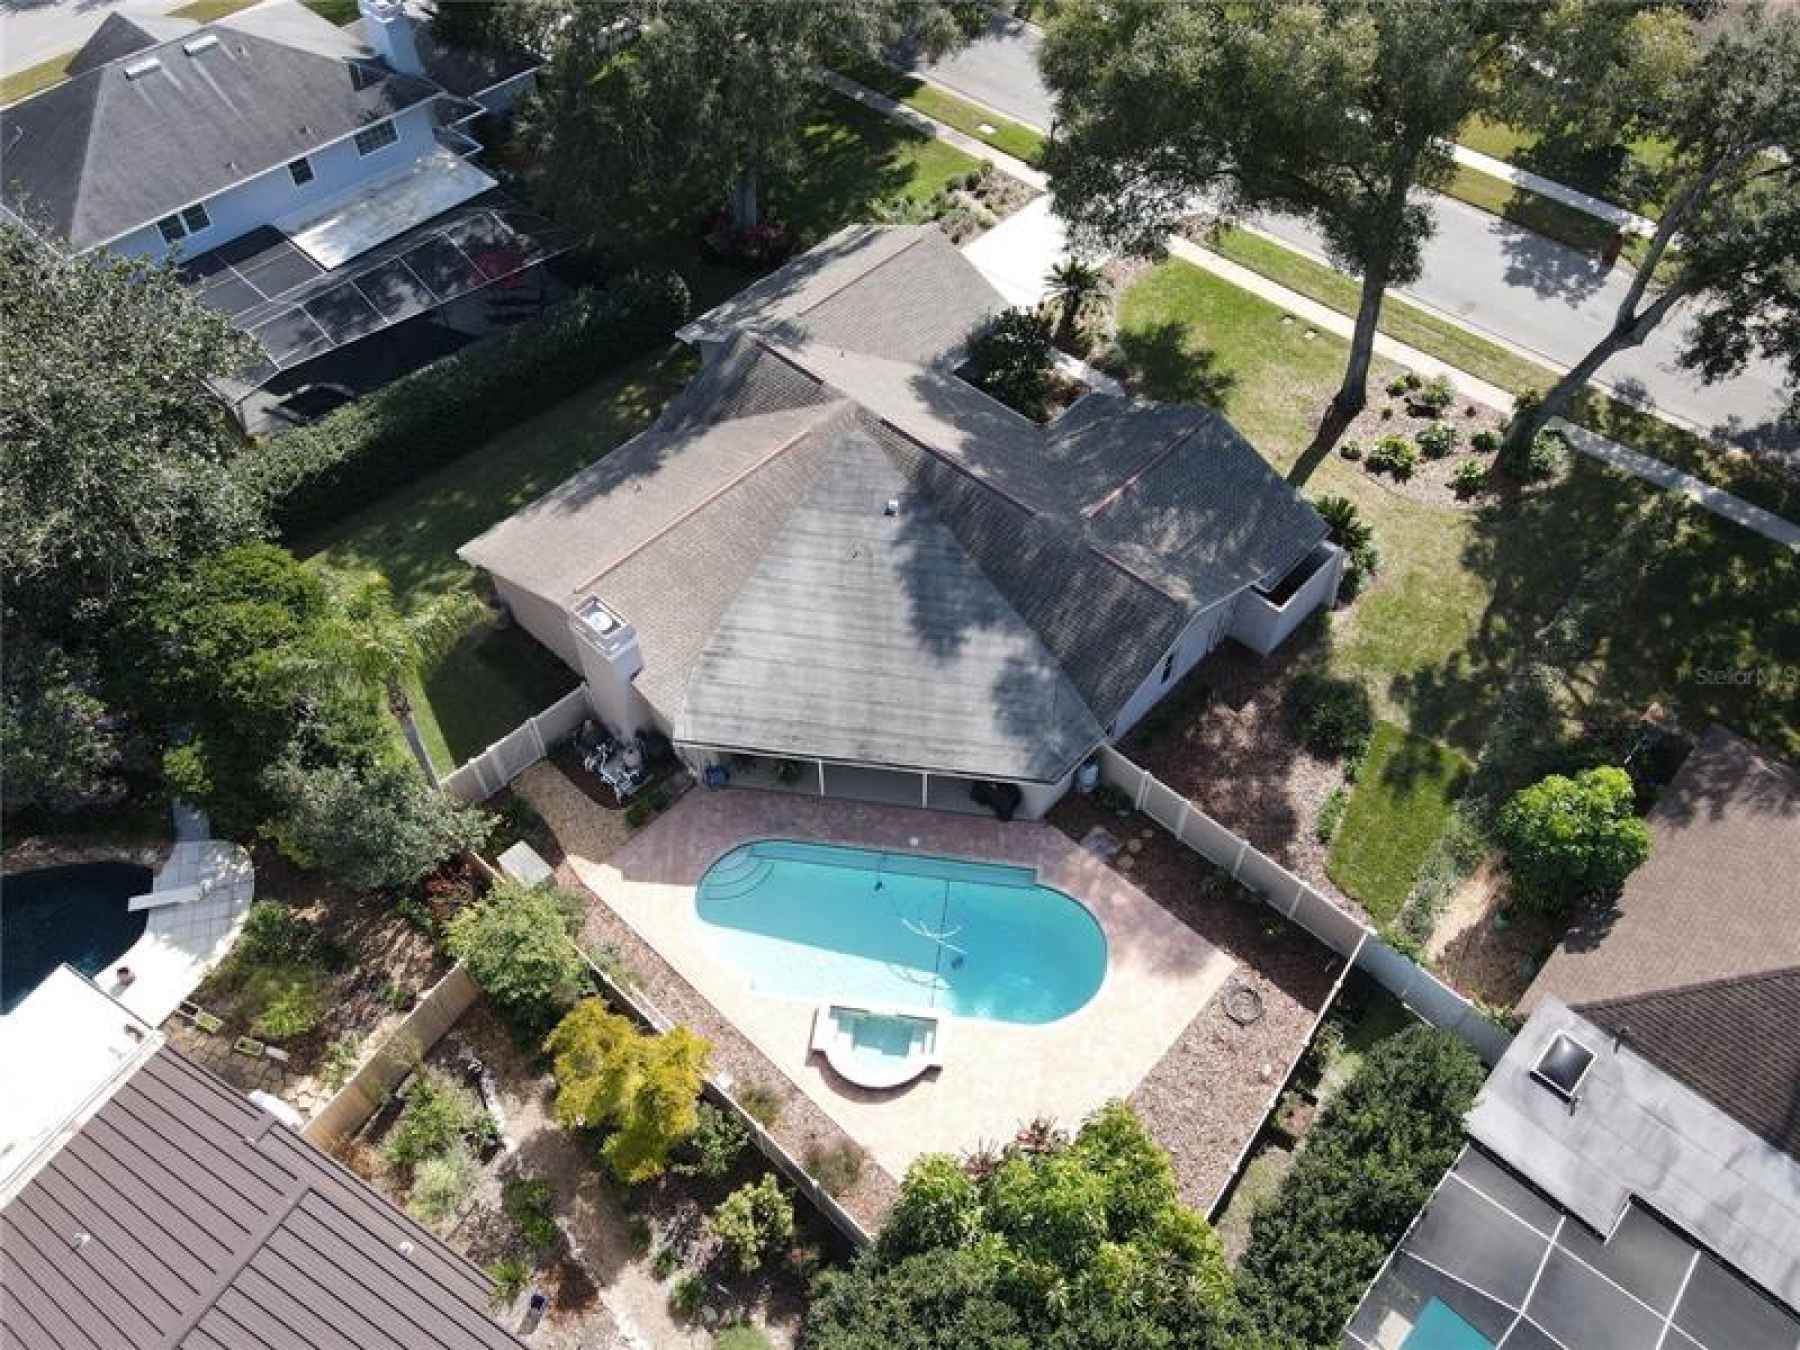 Drone view of the property